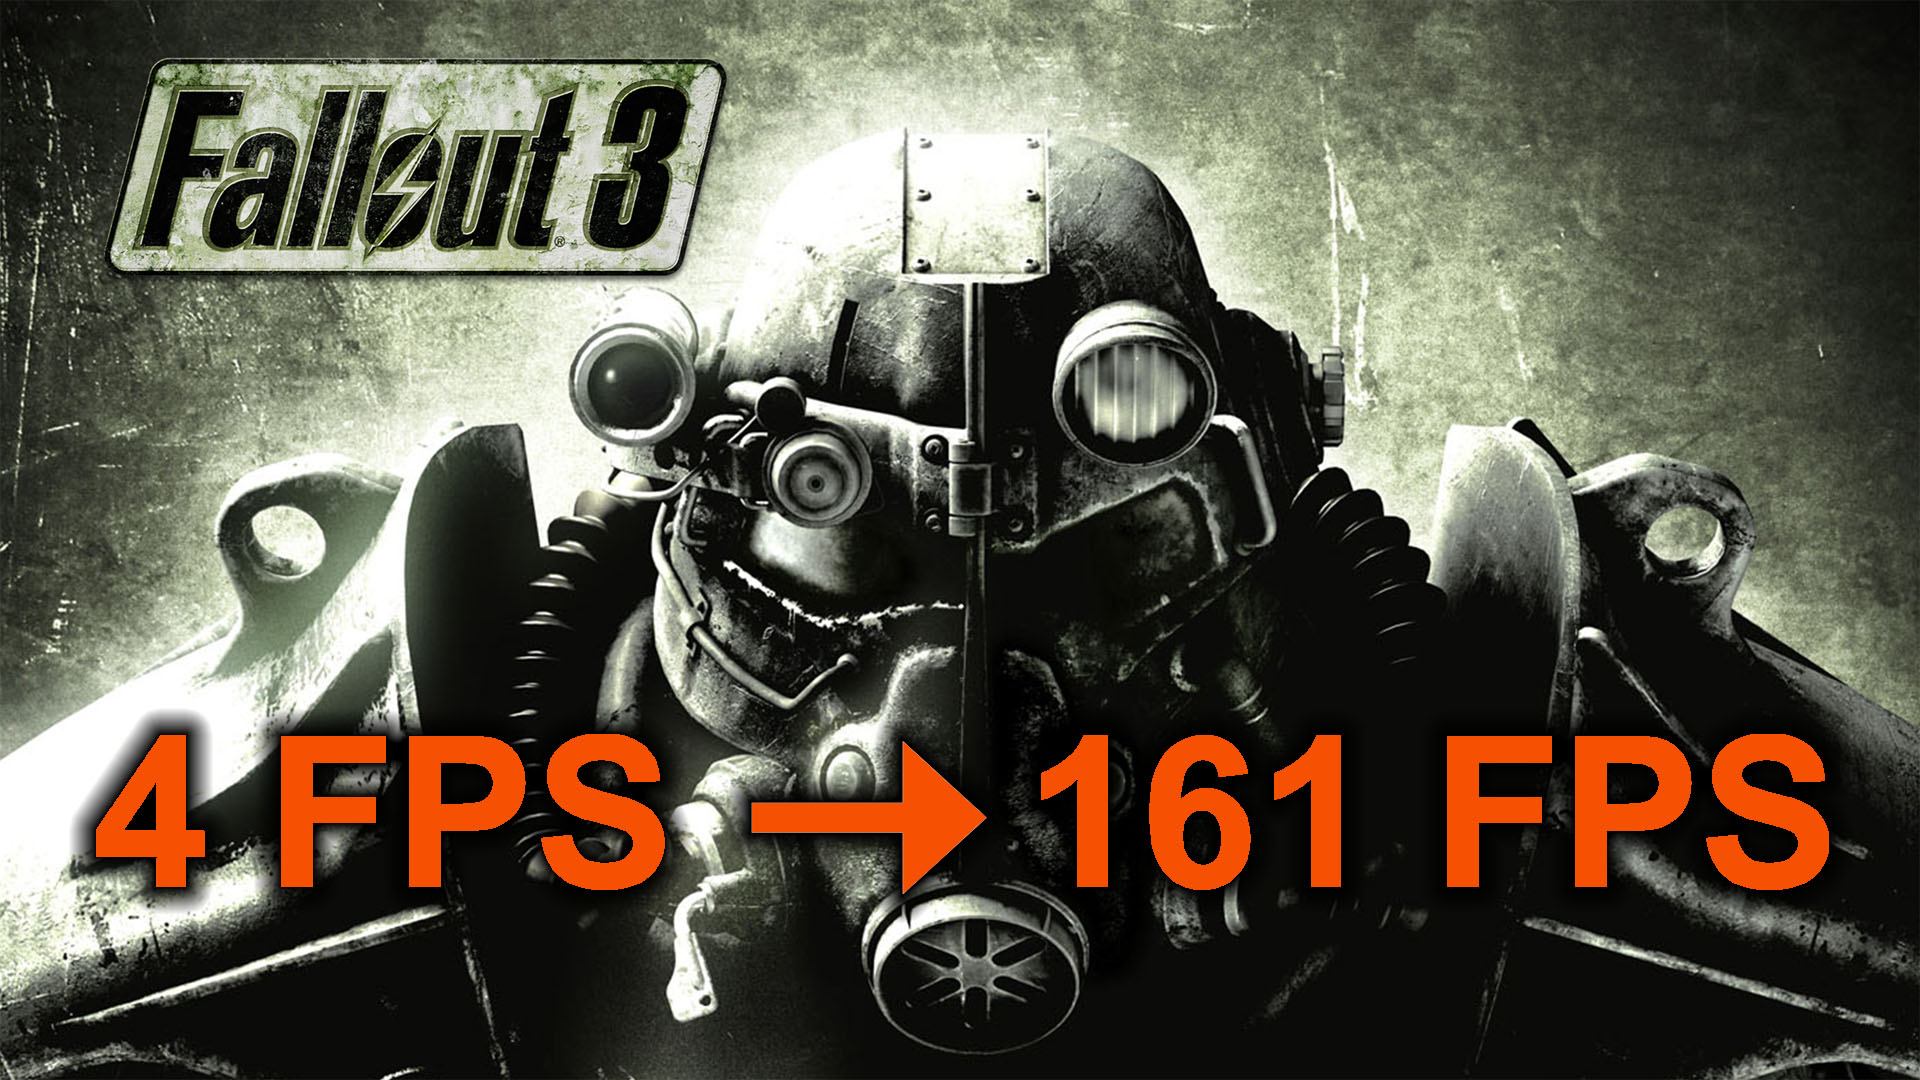 Fallout 3 is broken for some, but here's some ways to fix it